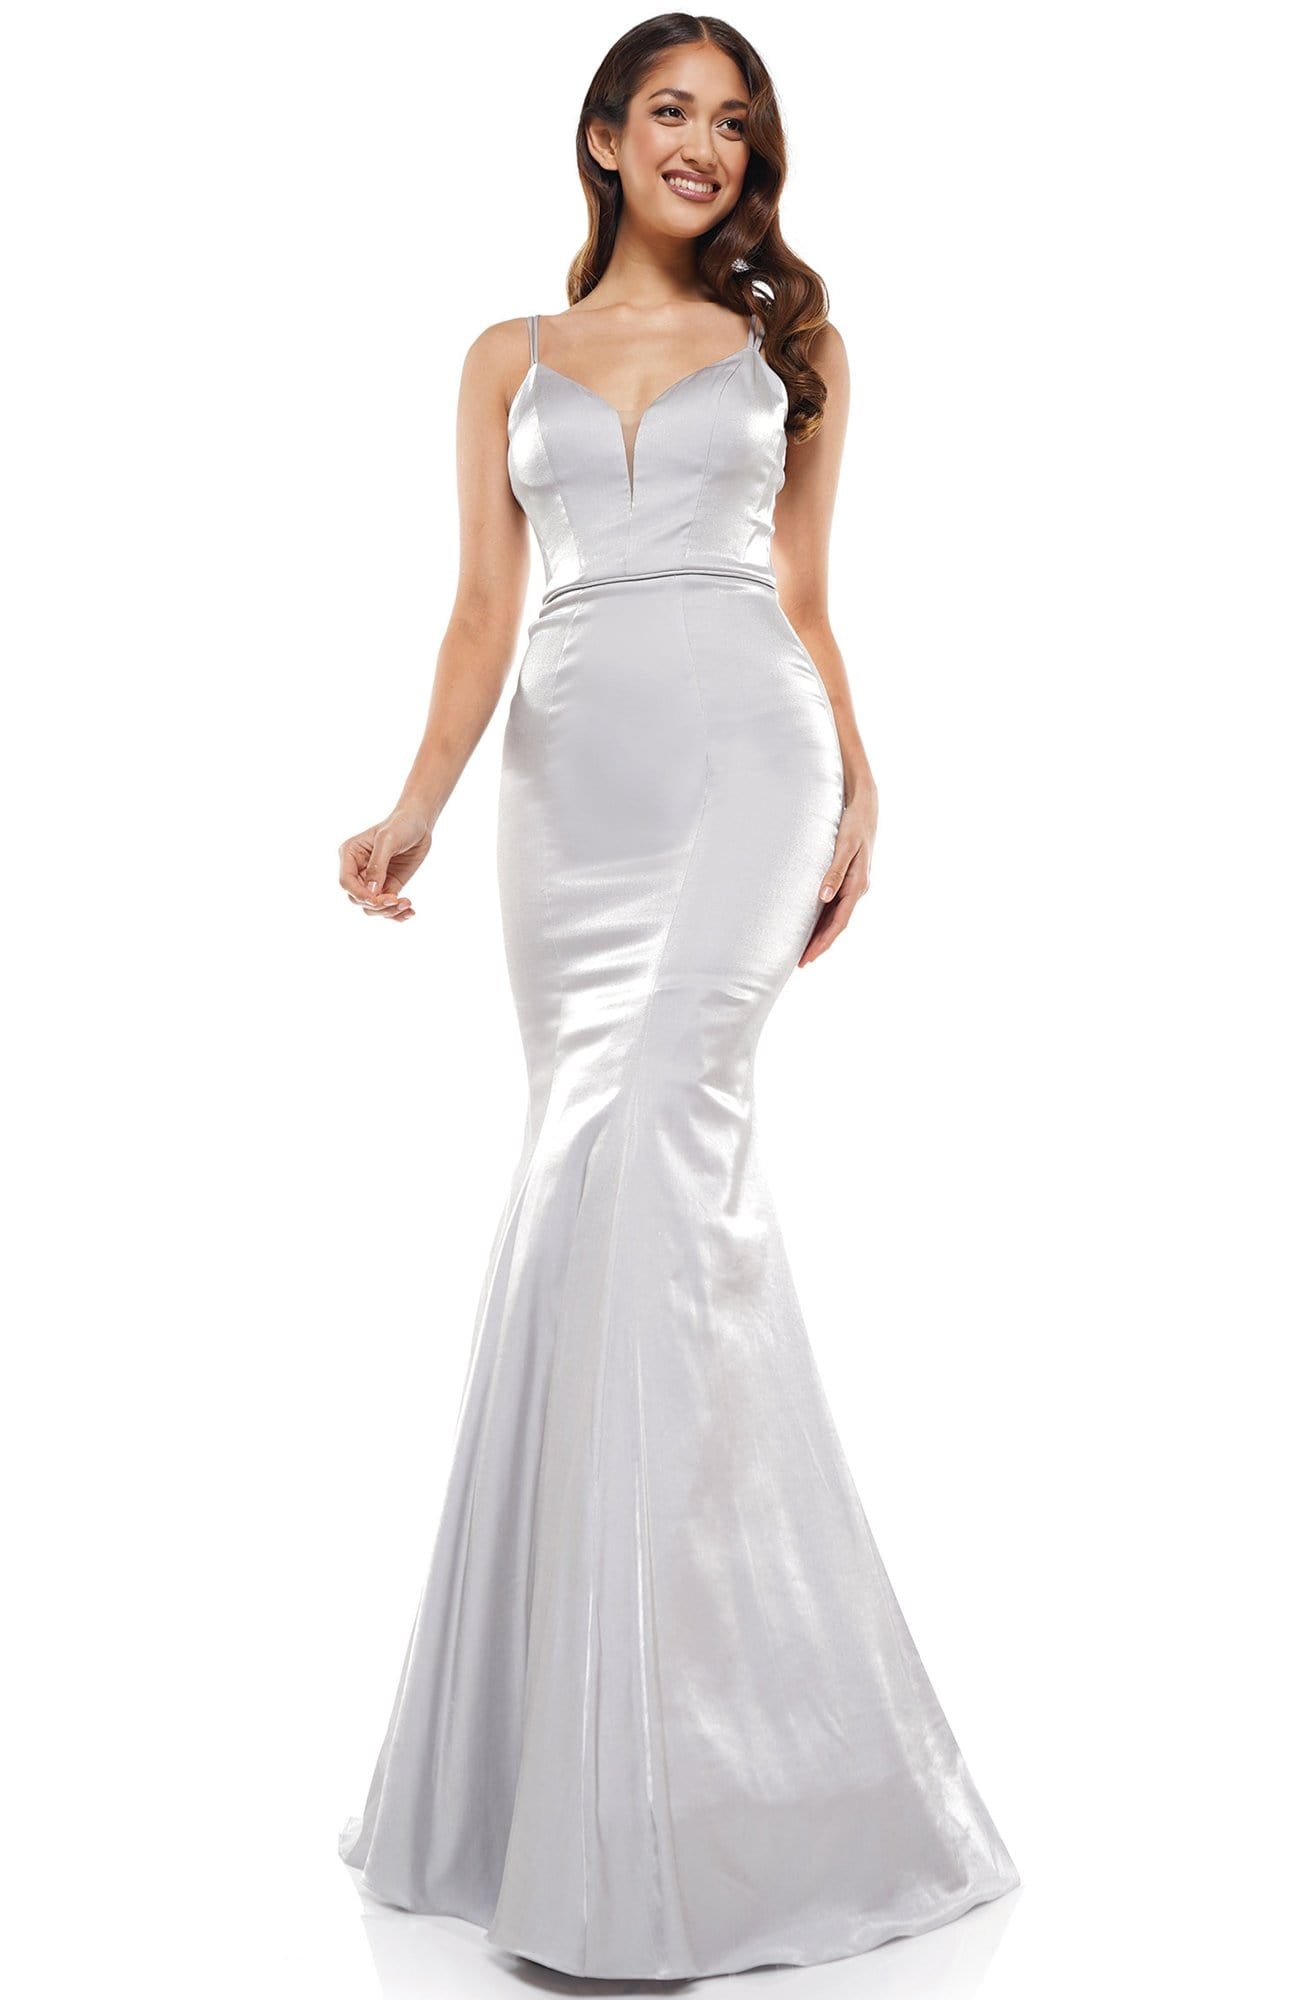 Glow Dress - G926 Sleeveless Double Strap Satin Mermaid Gown Prom Dresses 0 / Silver